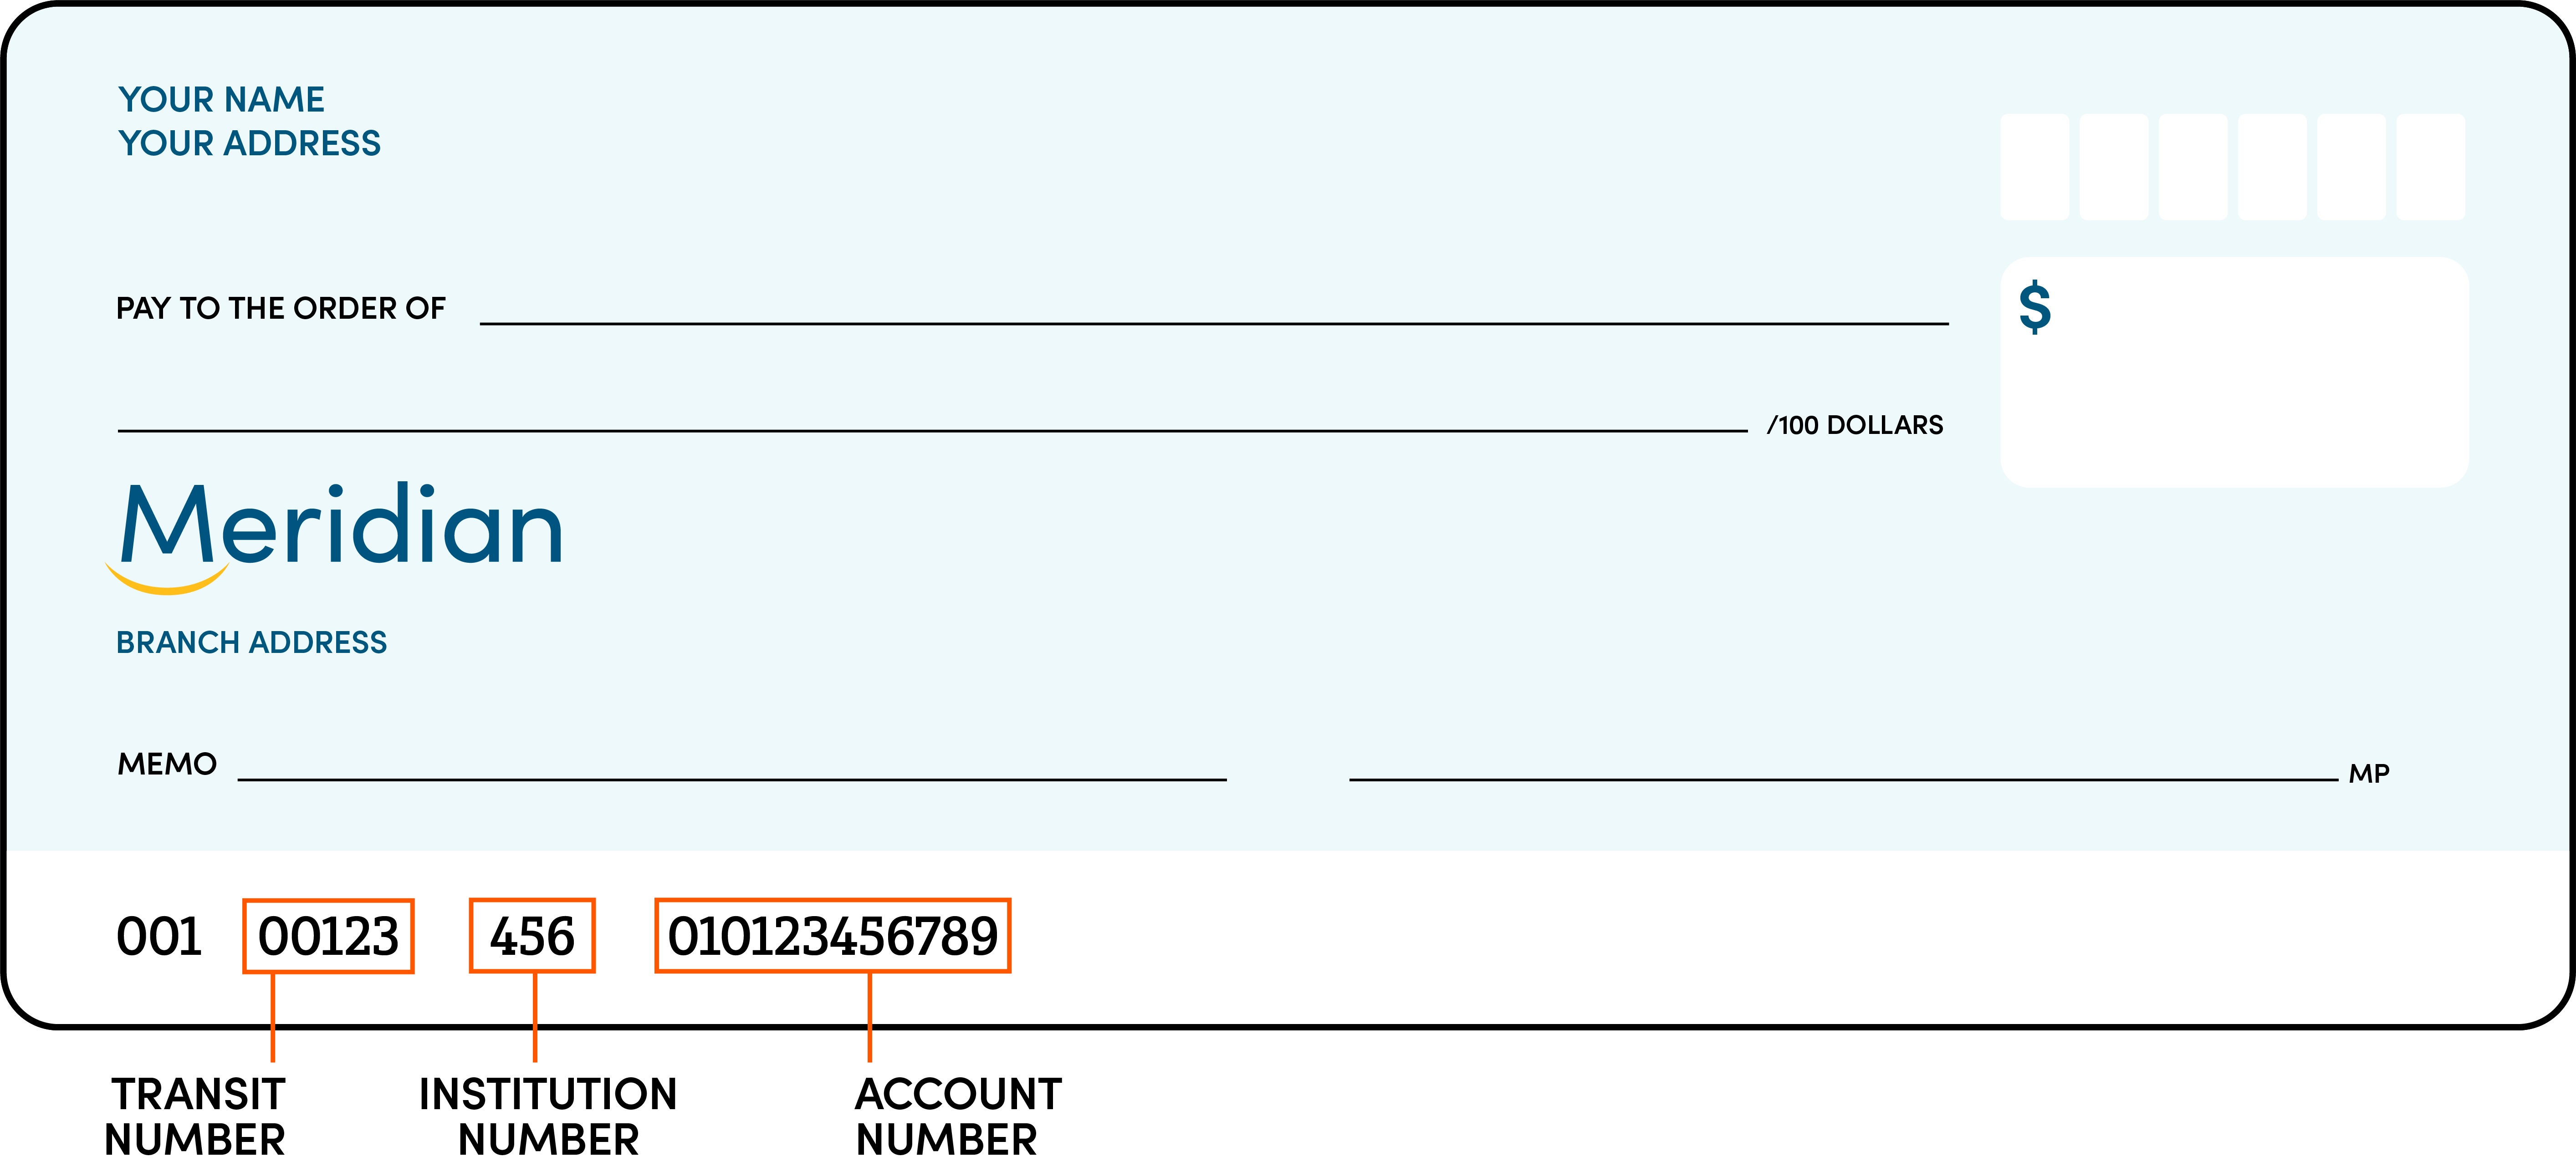 A blank Meridian cheque. Sets of numbers are circled and identified. The transit number is 00123, the institution number is 456, and the account number is 010123456789.